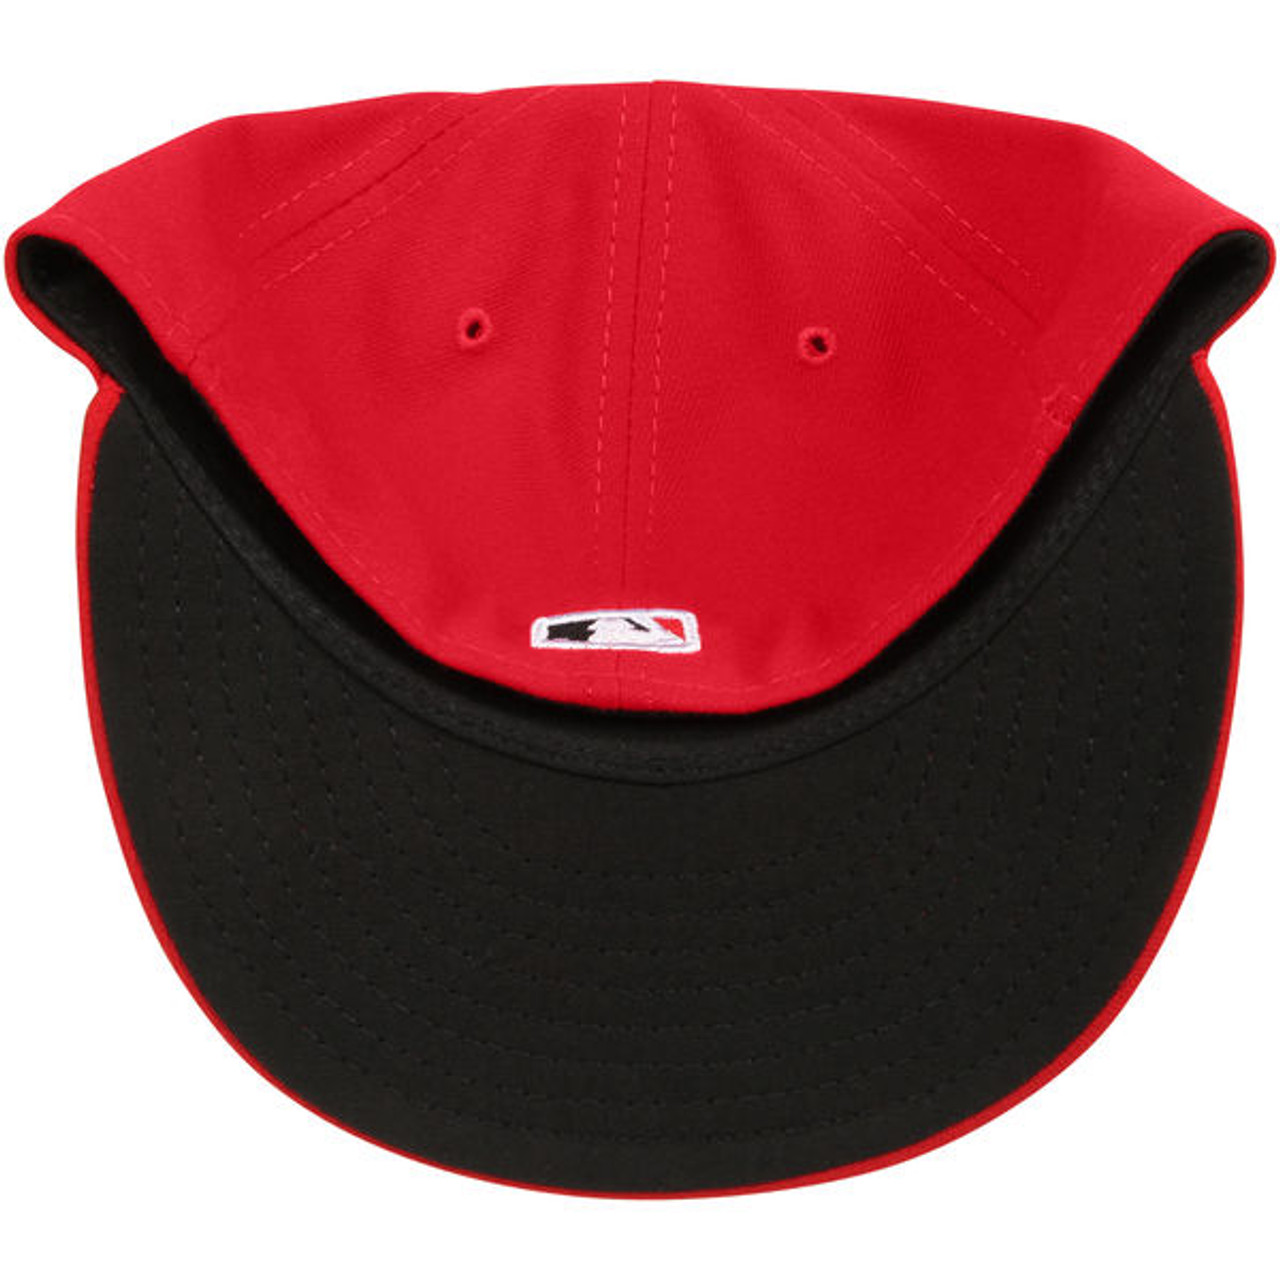 Cincinnati Reds New Era Authentic On-Field 59FIFTY Fitted Cap